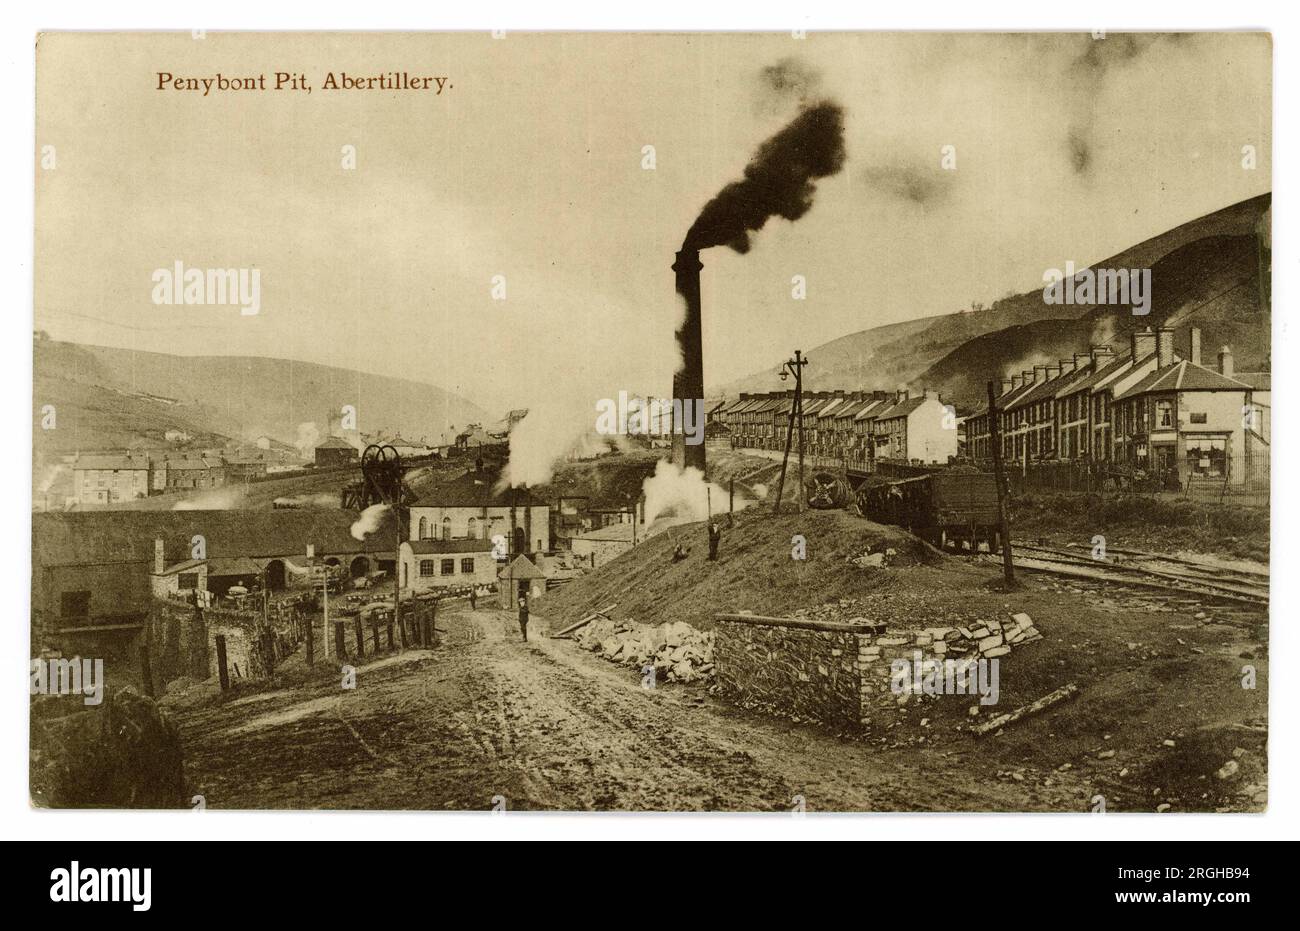 Original early 1900's postcard of industrial Welsh mining landscape,  showing smoking chimneys at Penybont Pit, Abertillery, Monmouth, South Wales, U.K. circa 1910. Stock Photo